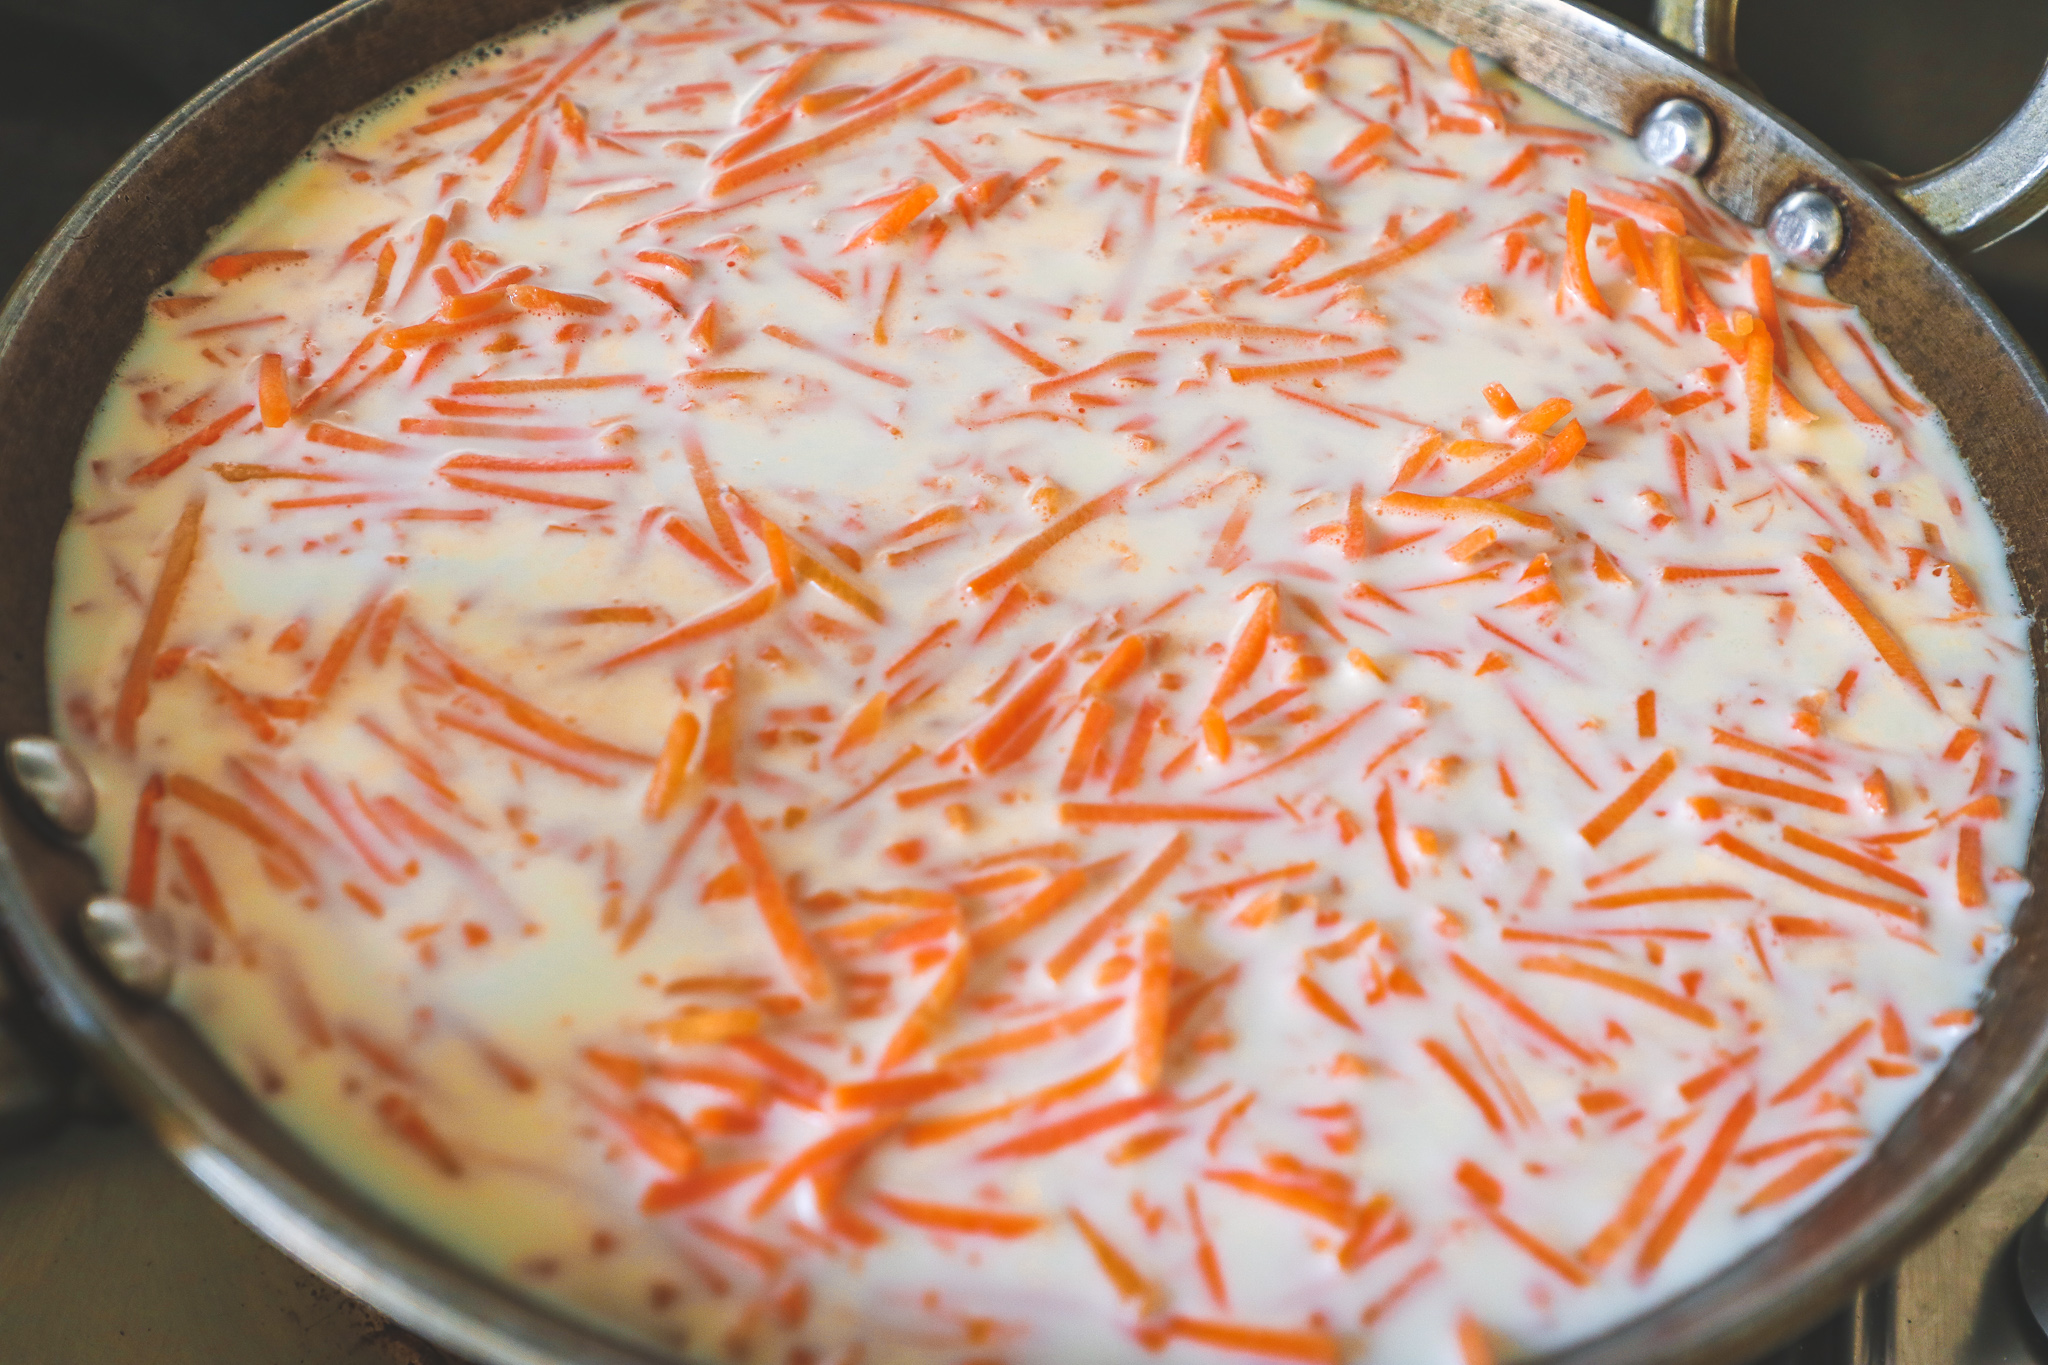 Grated Carrots soaked in milk